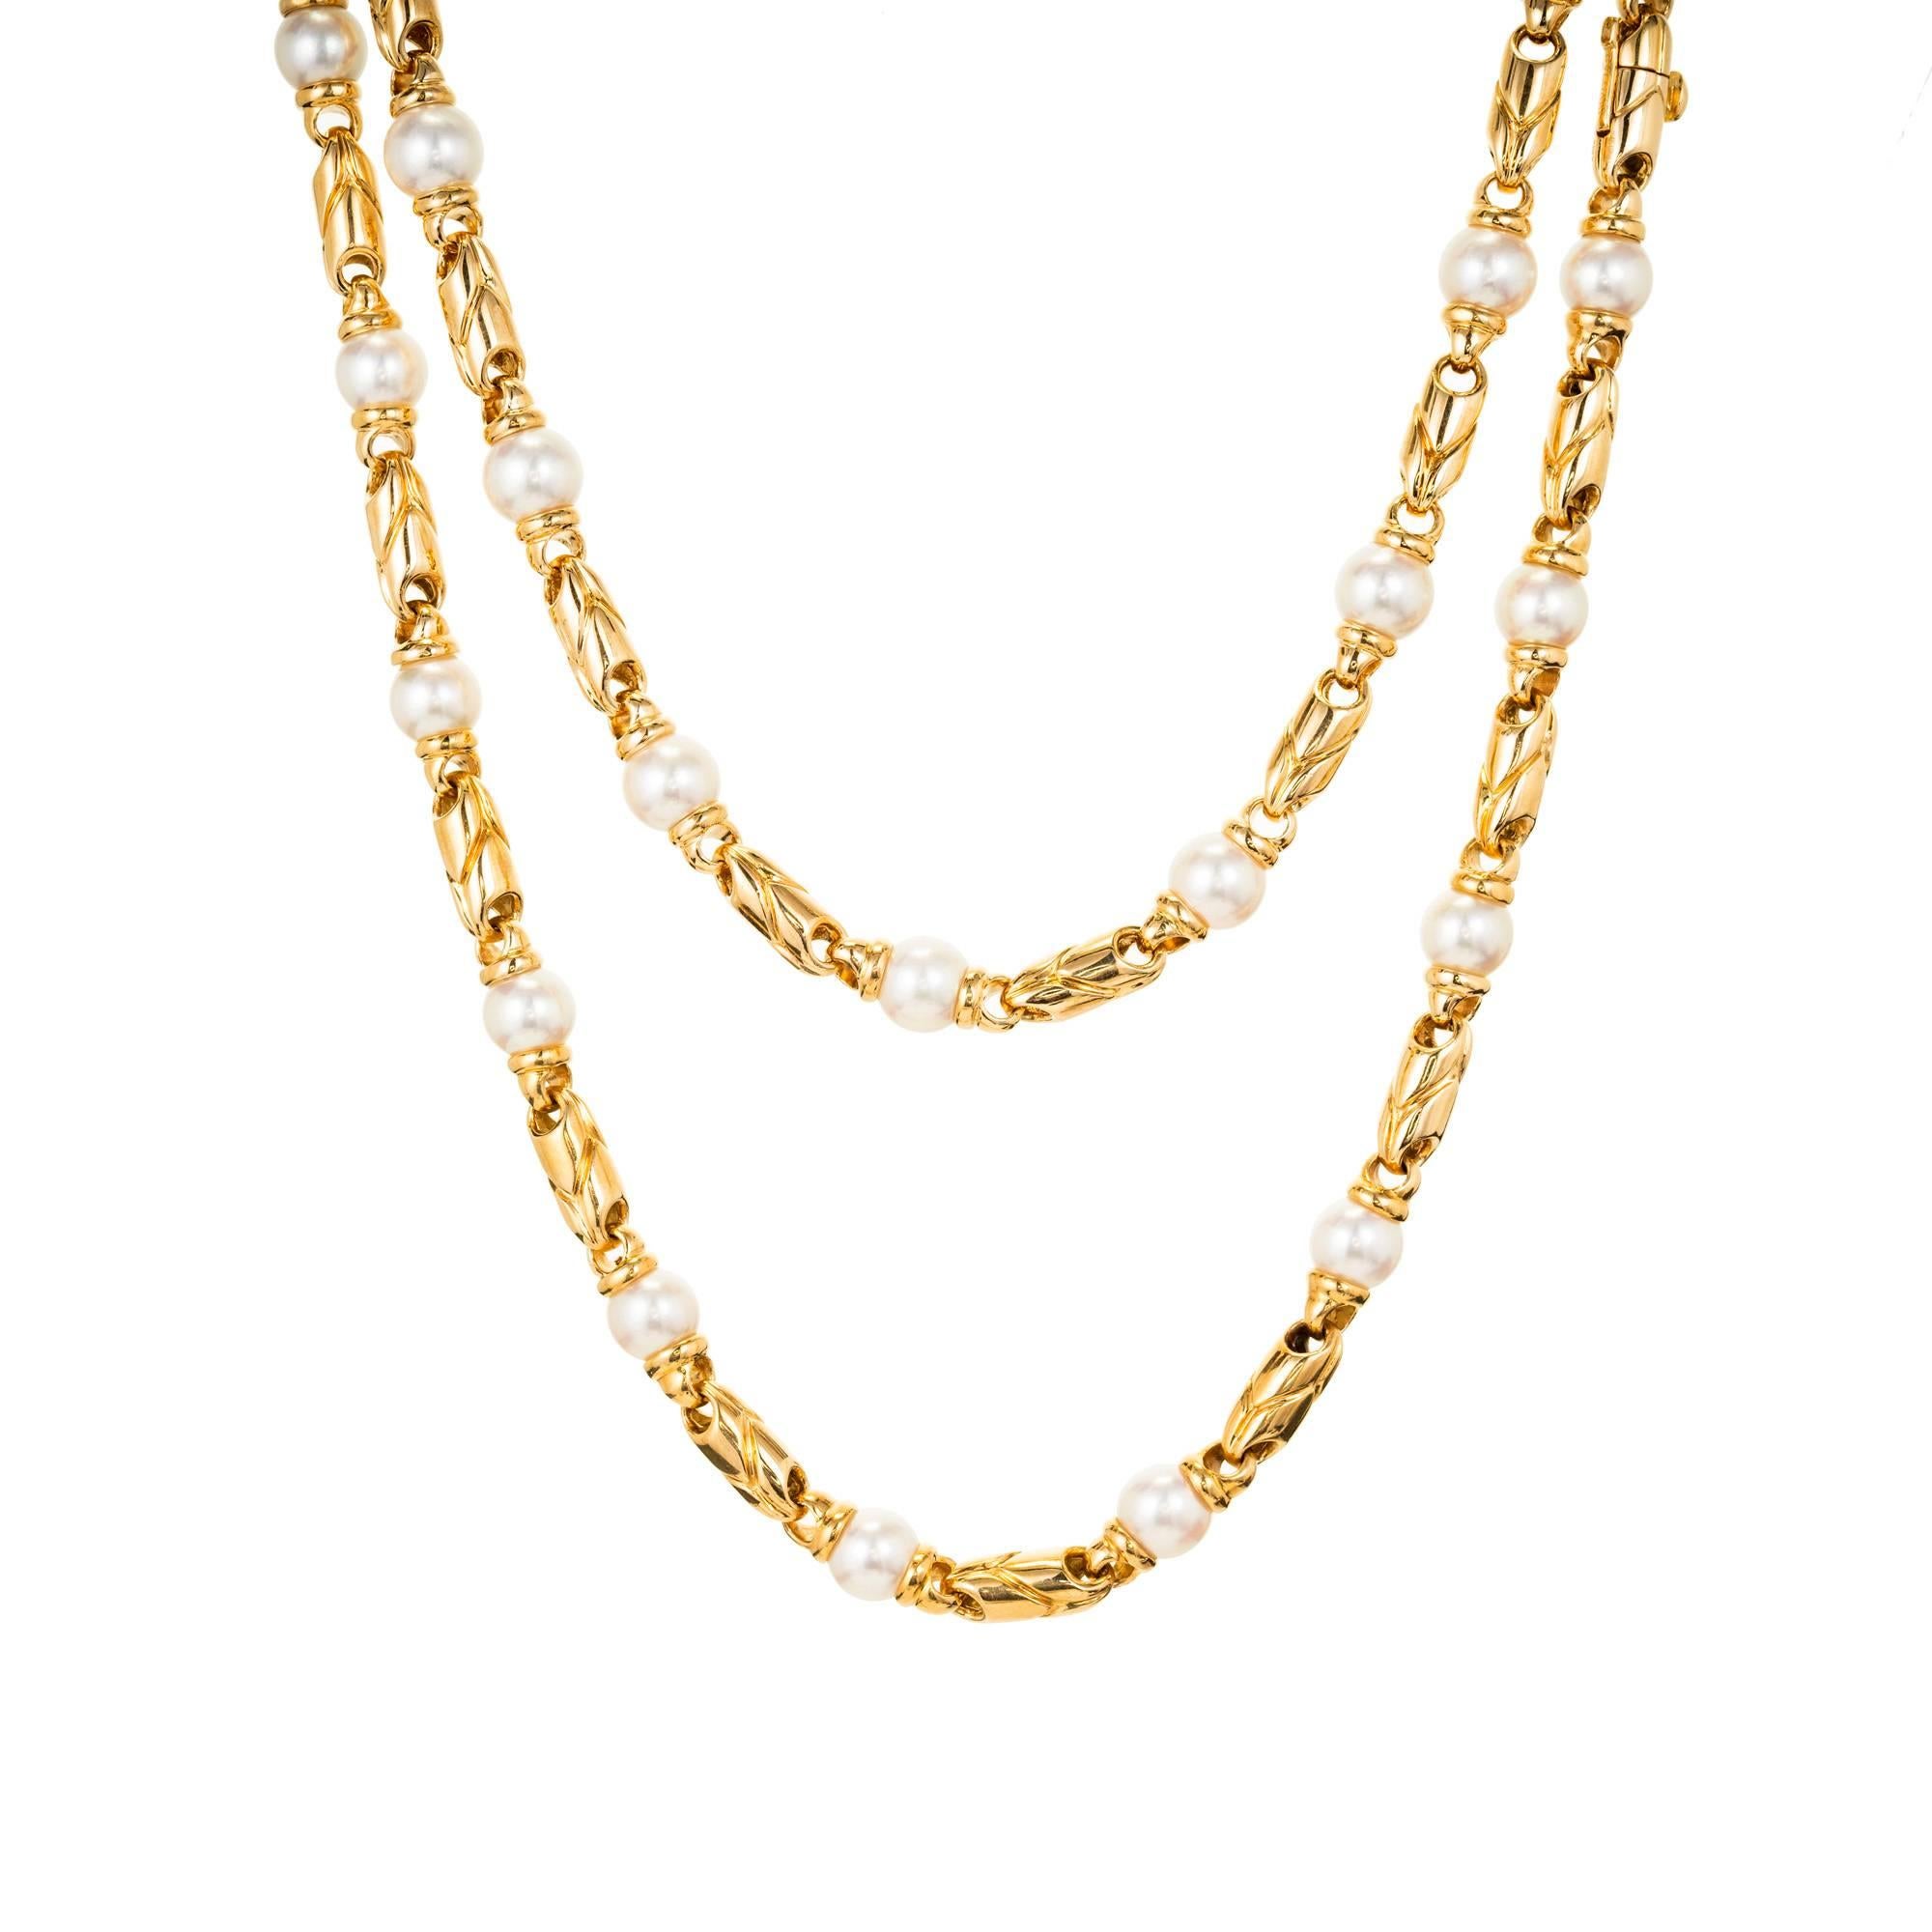 Bvlgari 18 yellow gold Passo Doppio Pearl Necklace. Two separate necklaces at 17.5 inches long each, allows this matched set to be worn single or double at 17.5 inches or clasped together at 35 inches. The clasps are built into the connecting links